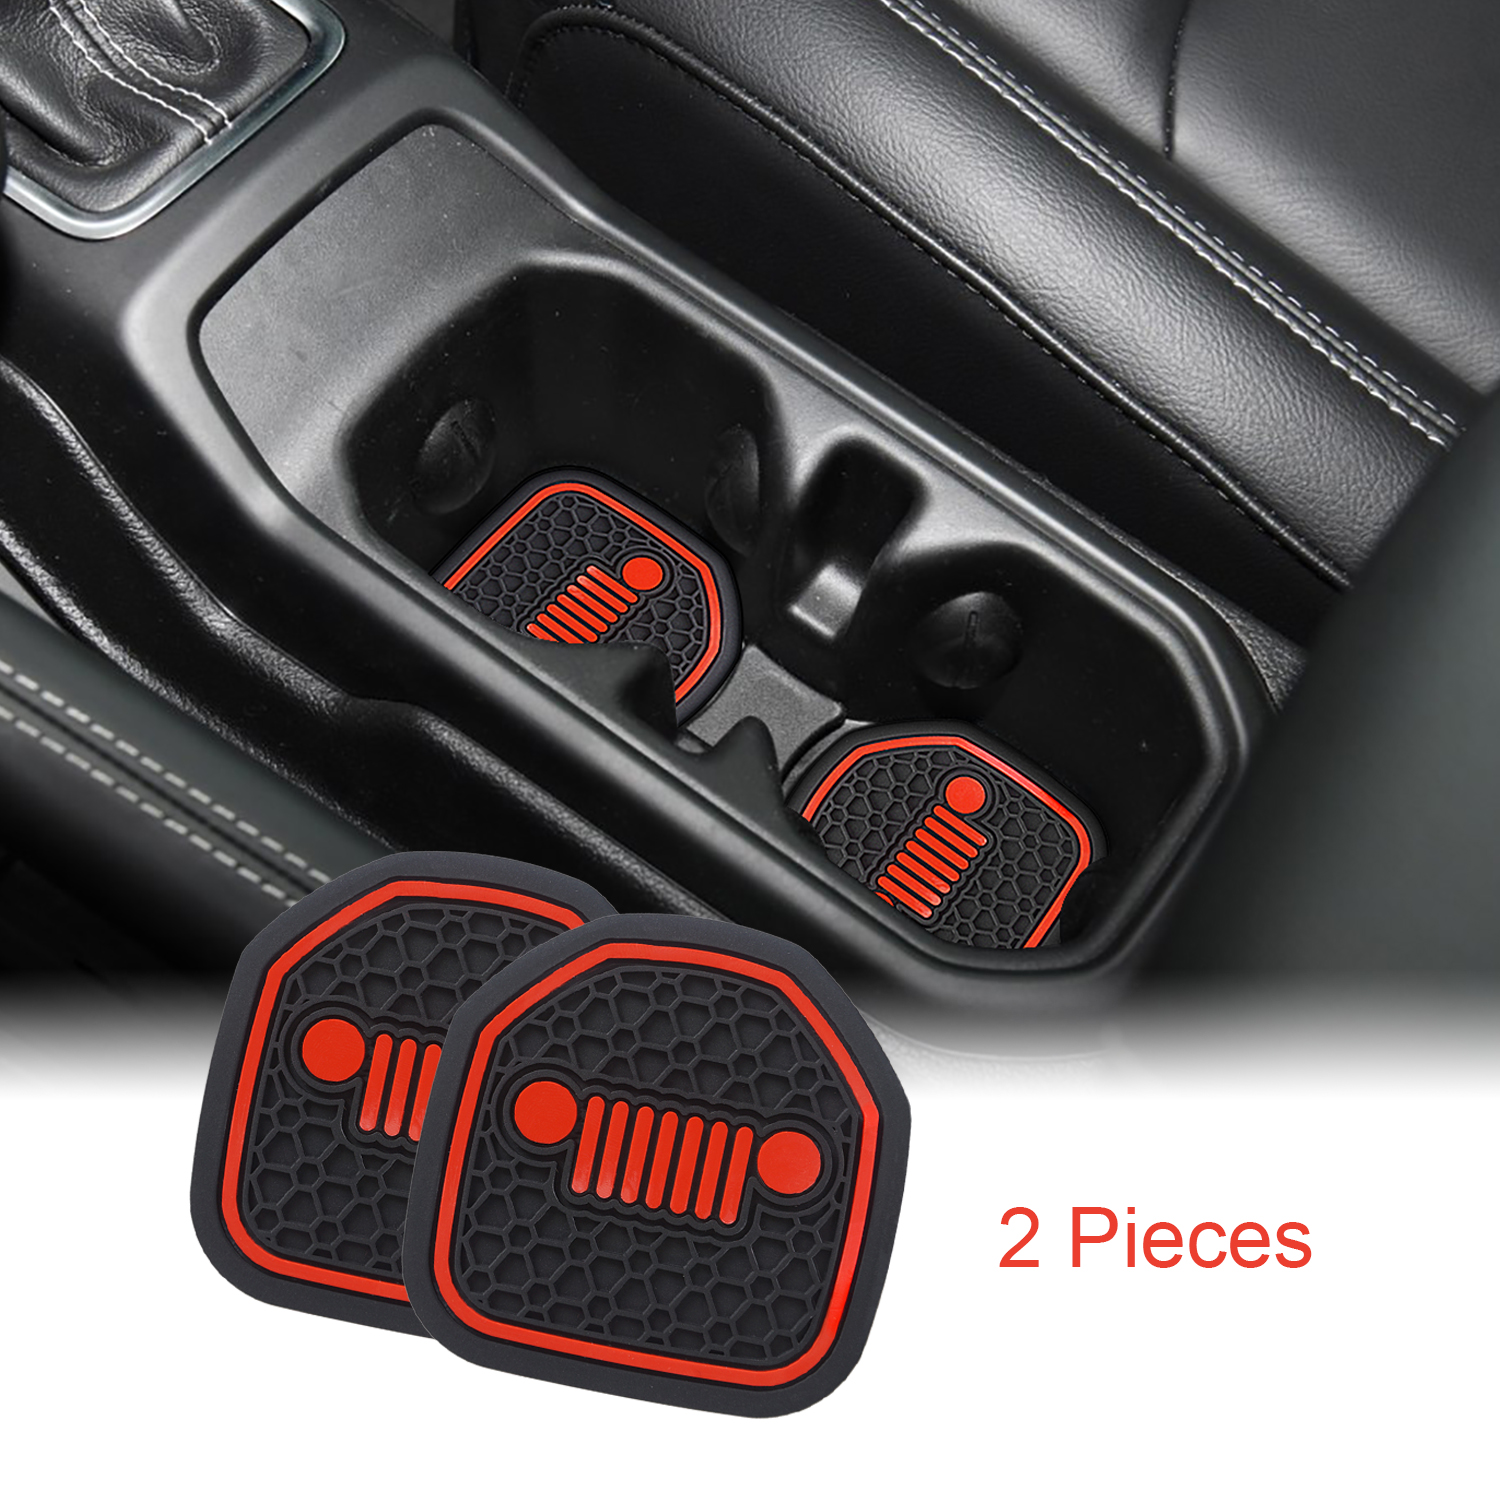 Blue 4 Pcs Kit Auovo Auto Cup Holder Inserts Coaster Fit for 2018-2021 Wrangler JL JLU 2020-2021 Gladiator Accessories JT Cup Mat Pad Interior Decoration 